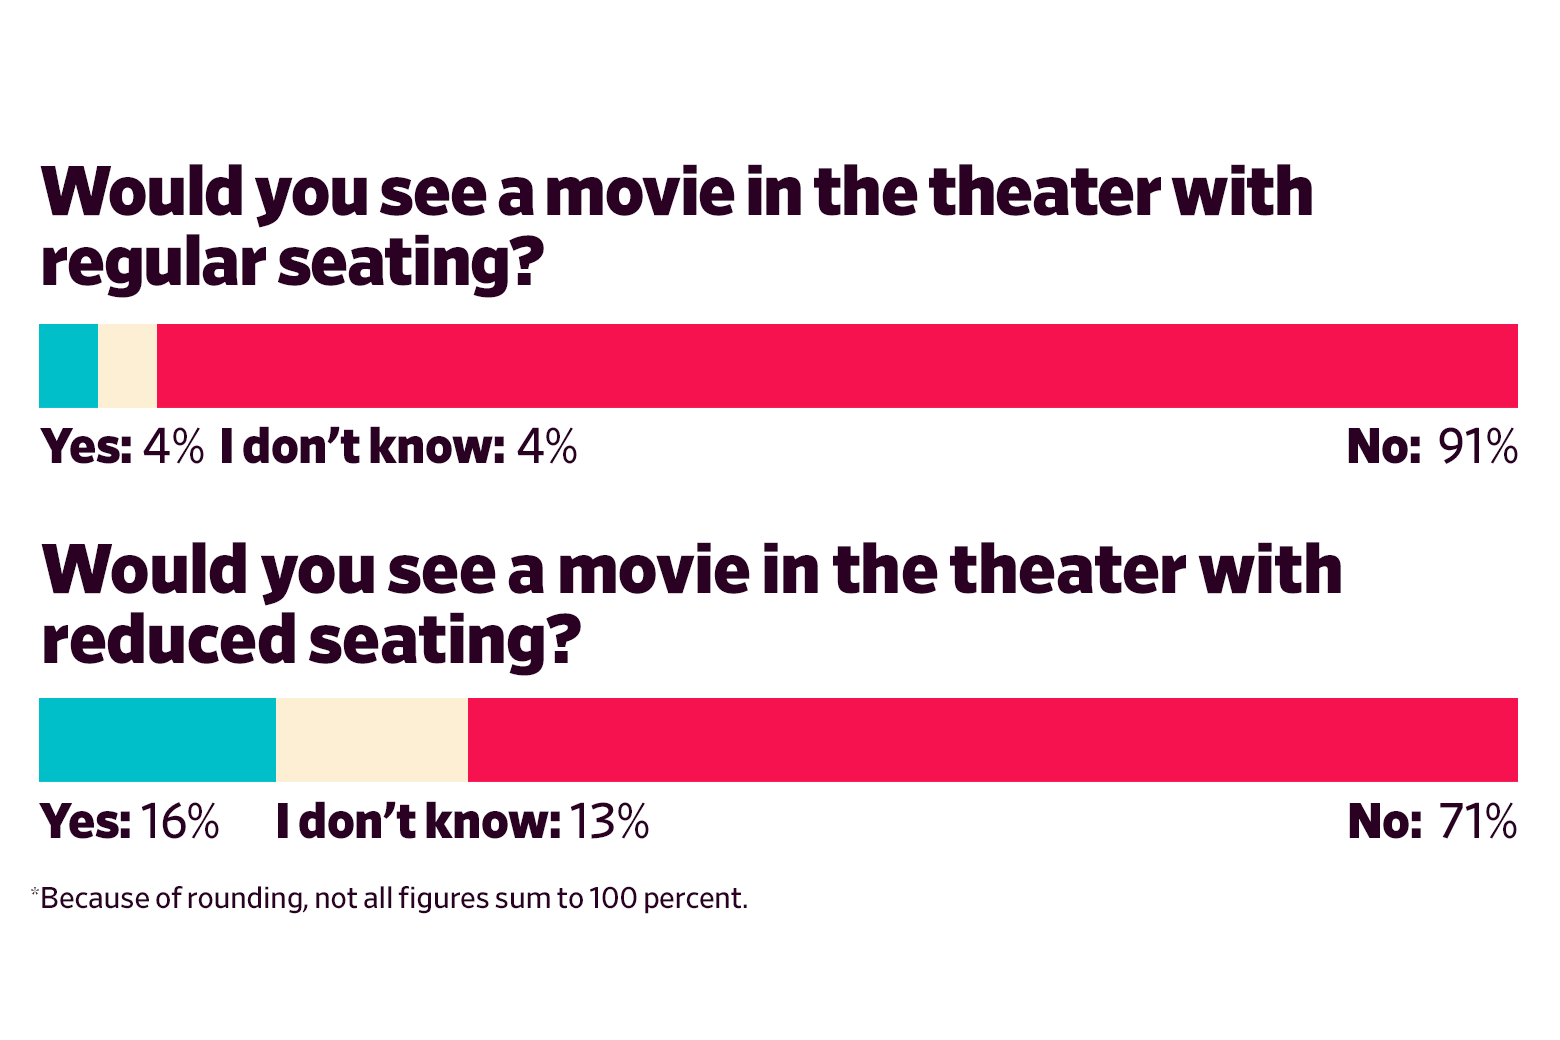 Would you see a movie in the theater with regular seating? Yes: 4 I don’t know: 4 No: 91  Would you see a movie in the theater with reduced seating? Yes: 16 I don’t know:  13 No: 71